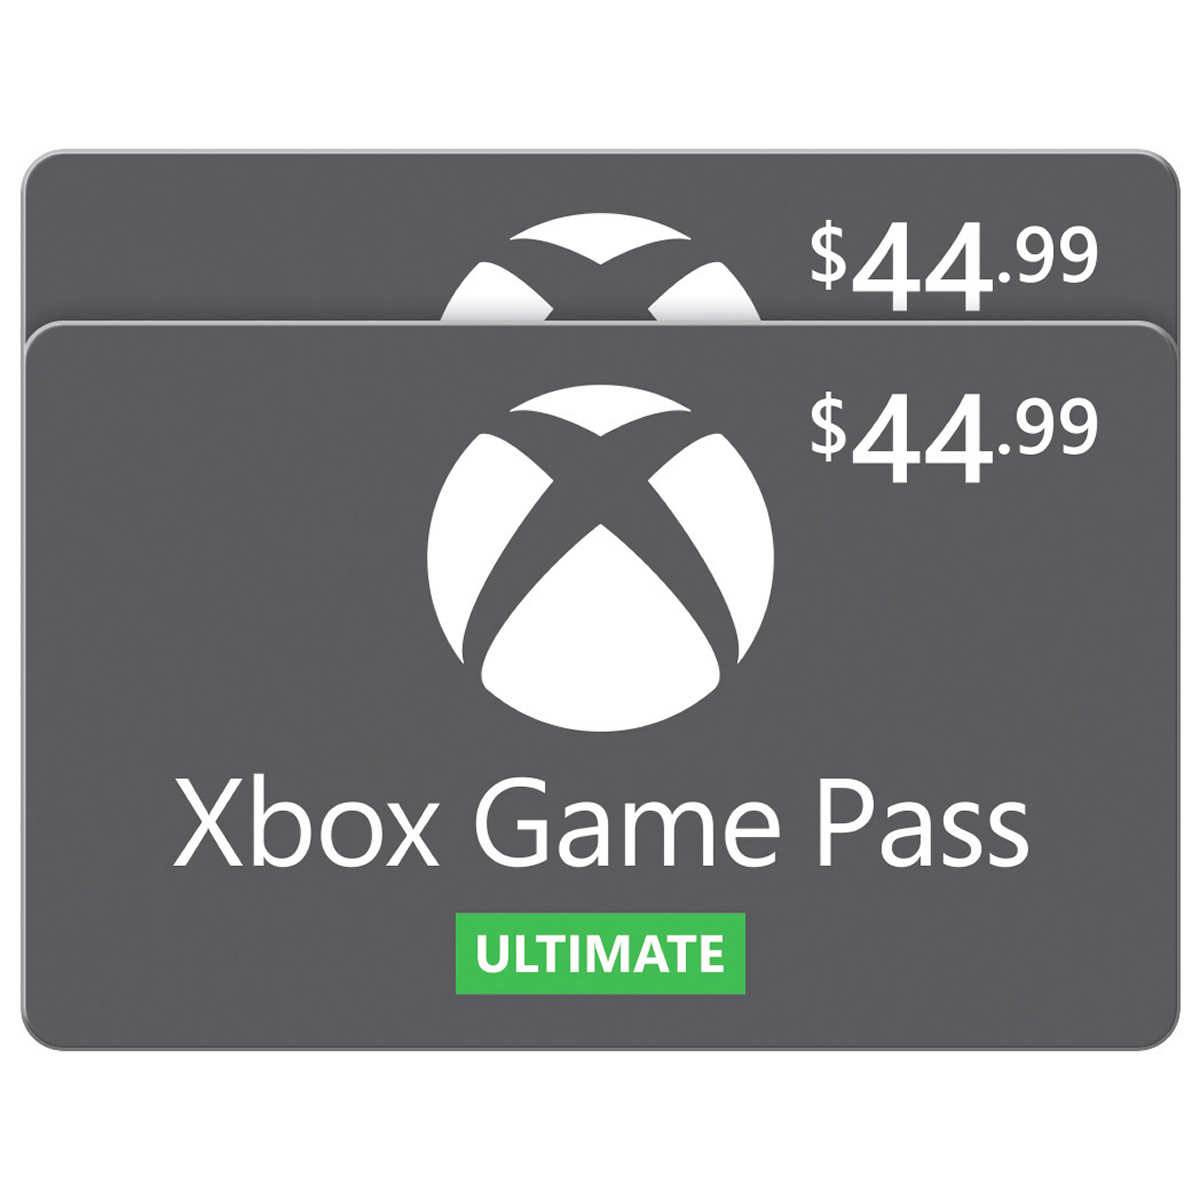 Xbox Game Pass Ultimate 1-Month Membership